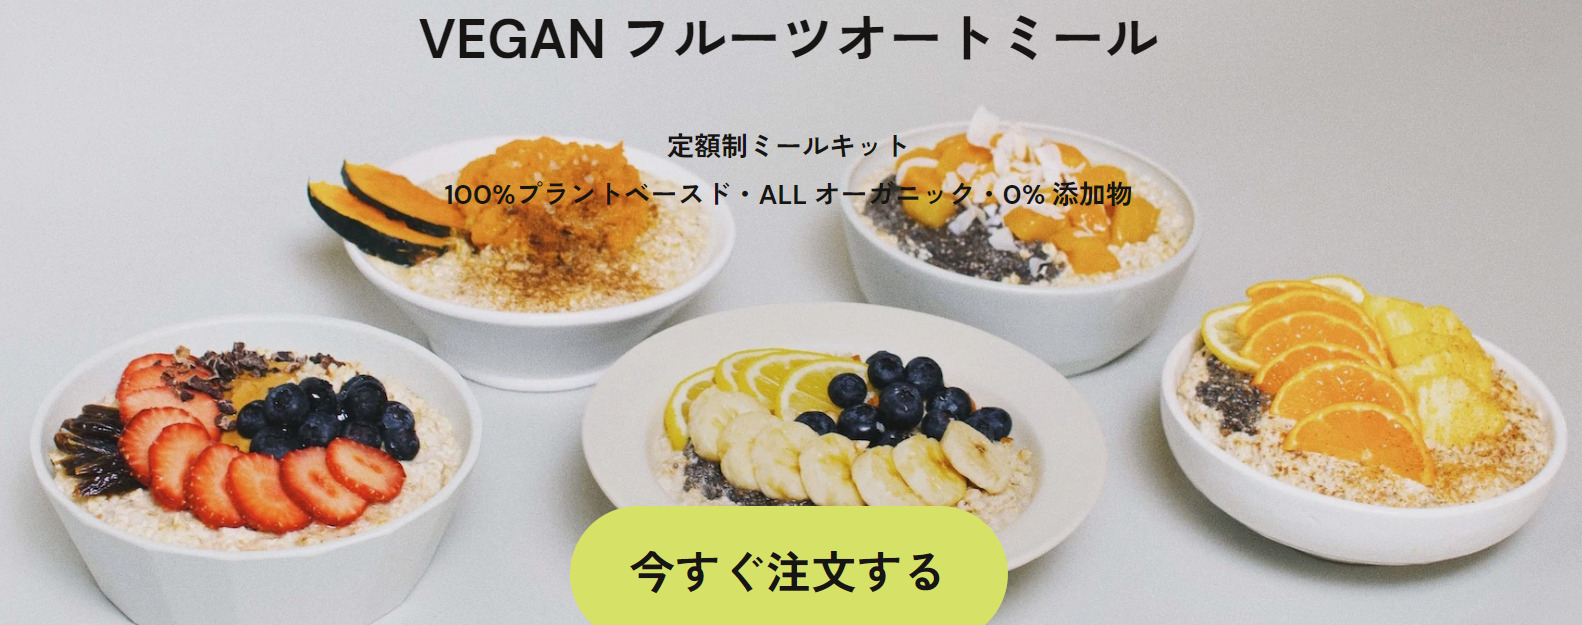 VEGANフルーツオートミール by yours+ours　バナー